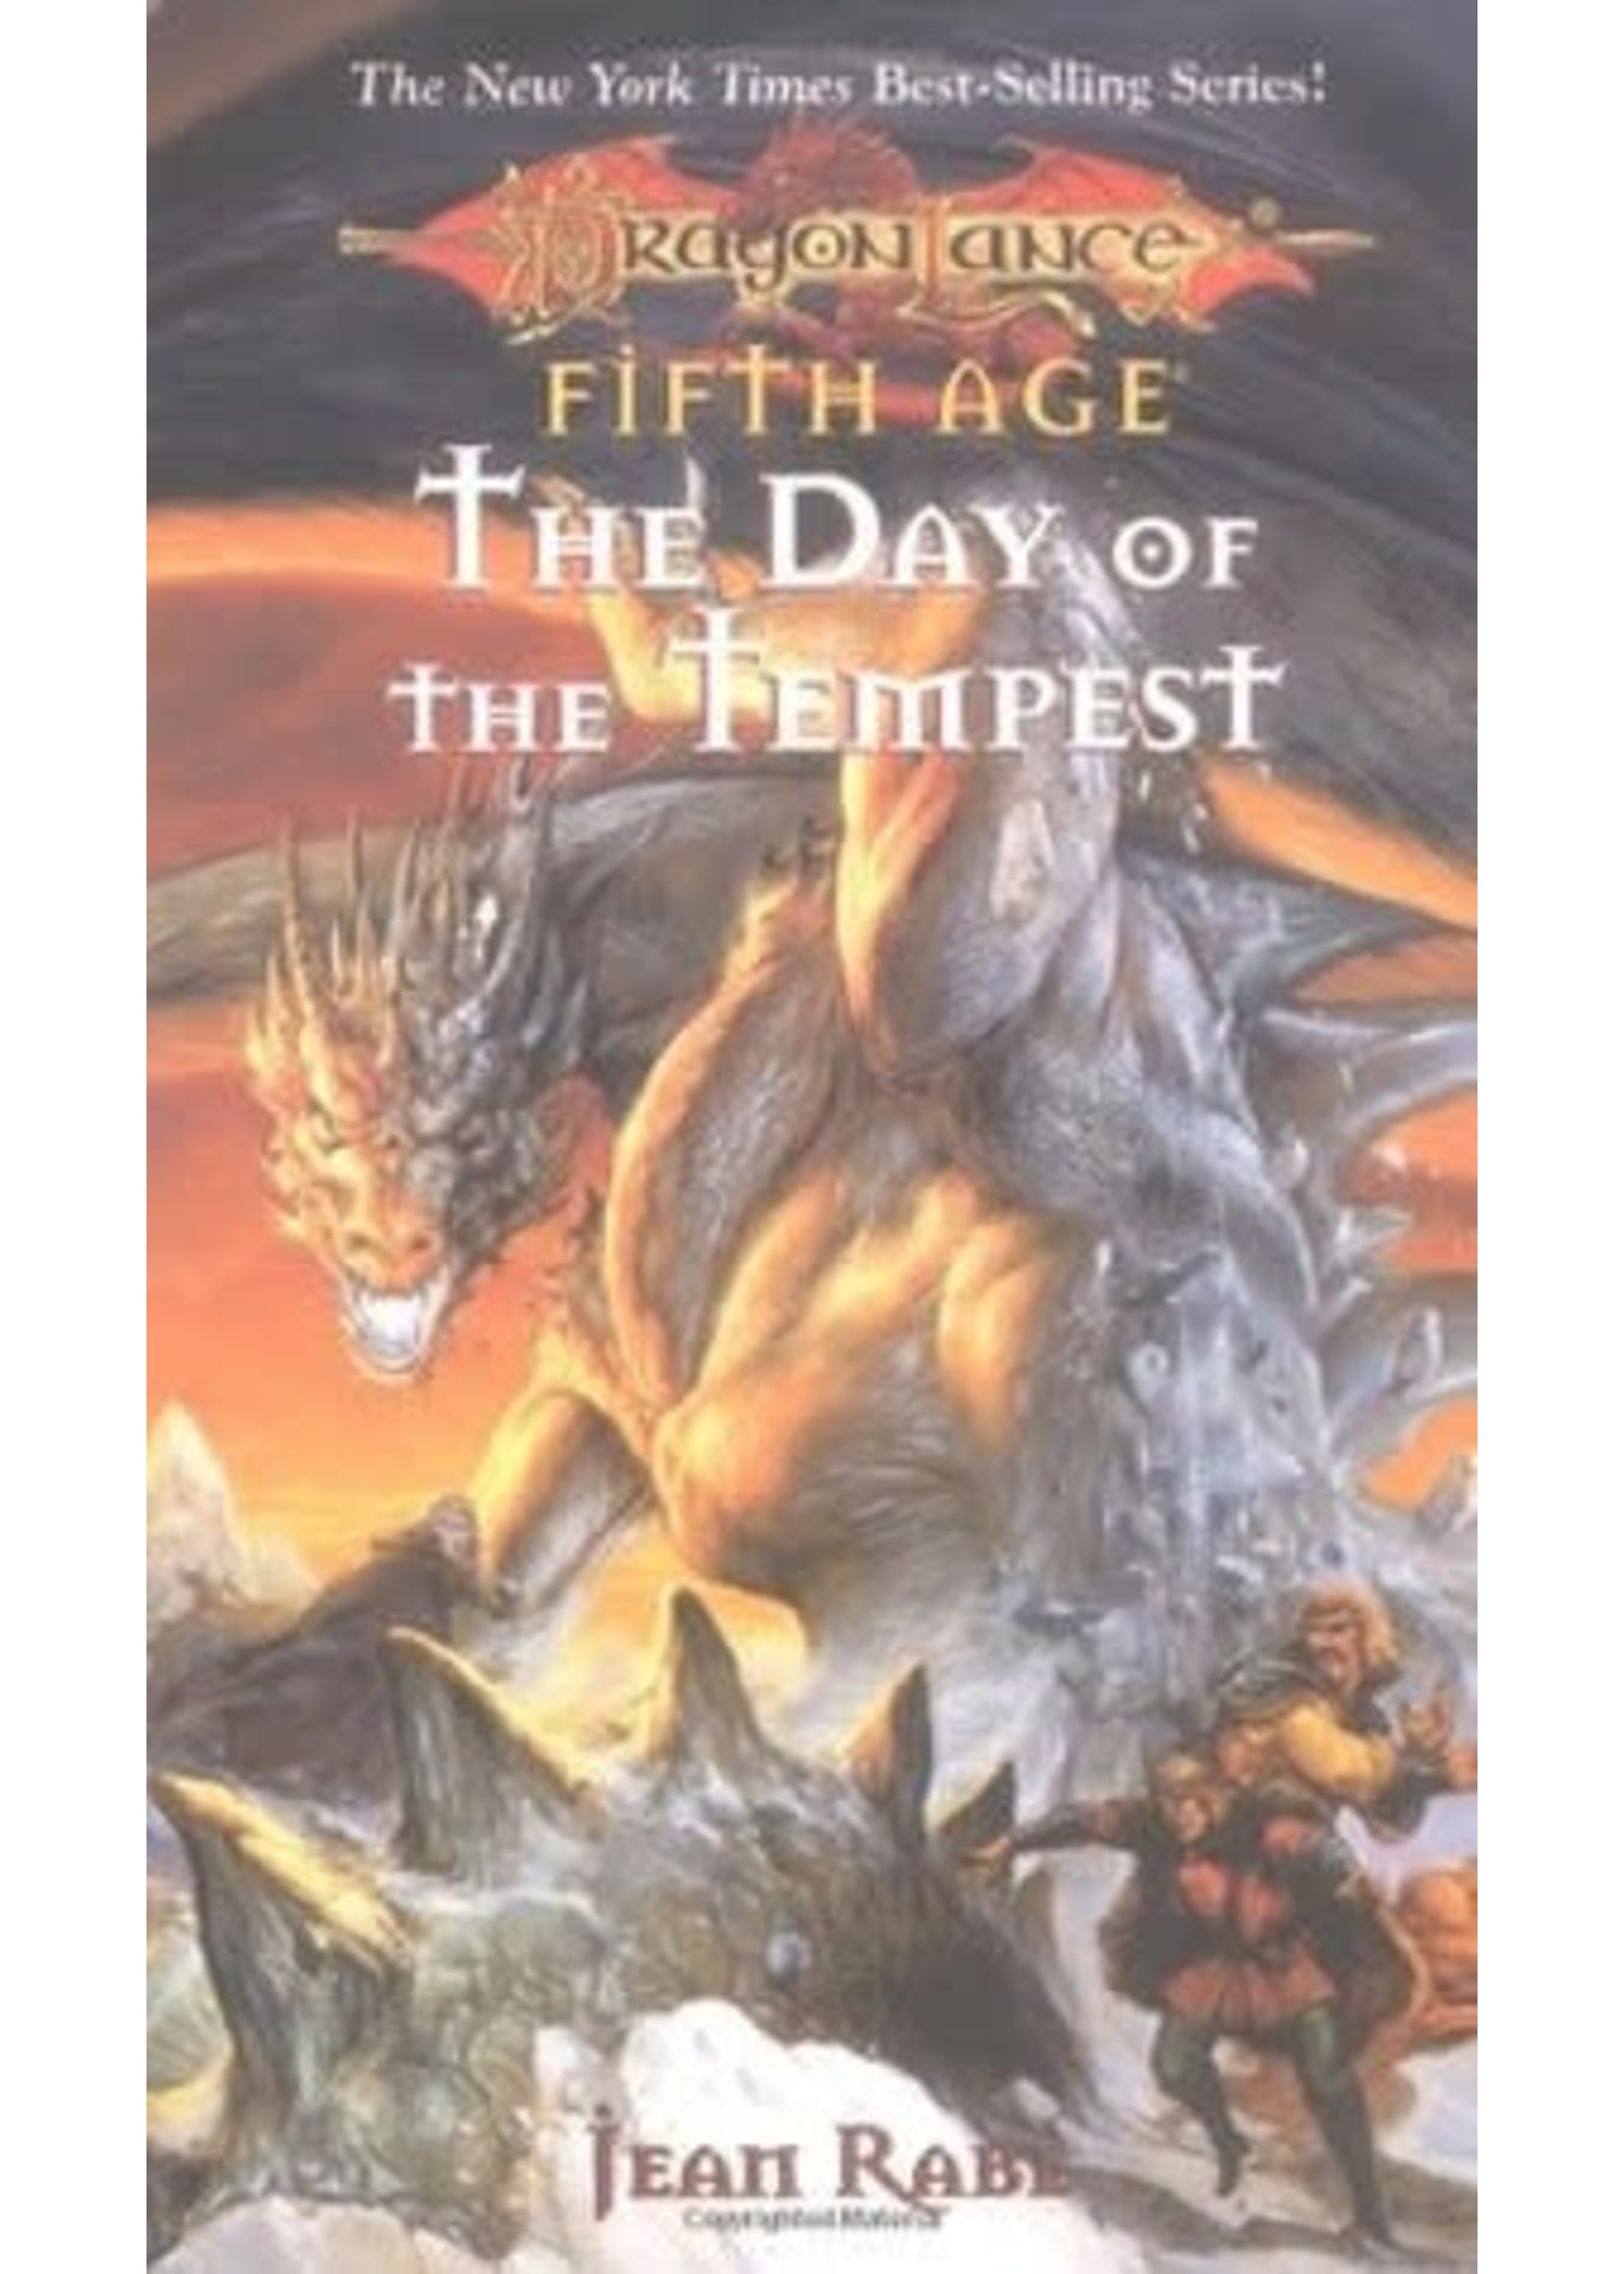 The Day of the Tempest (Dragonlance: Dragons of a New Age #2) by Jean Rabe